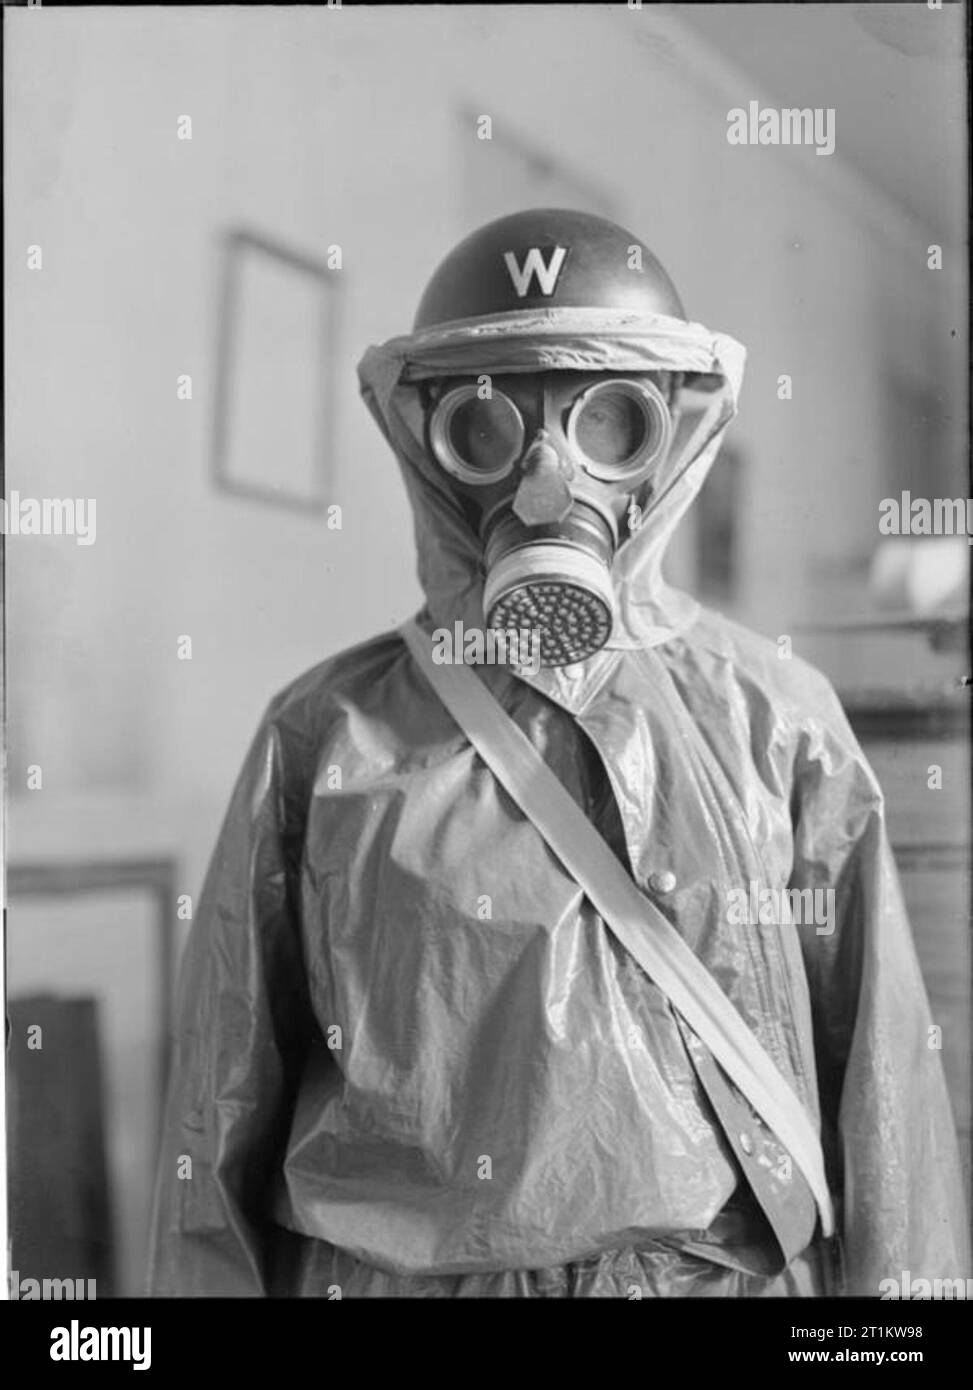 Anti-gas Clothing For Air Raid Wardens, 1941 A half length portrait of an Air Raid Warden wearing gas protective clothing, gas mask and steel helmet. The gas protection outfit is an oilskin overall, similar in style to Churchill's 'siren suit'. Stock Photo